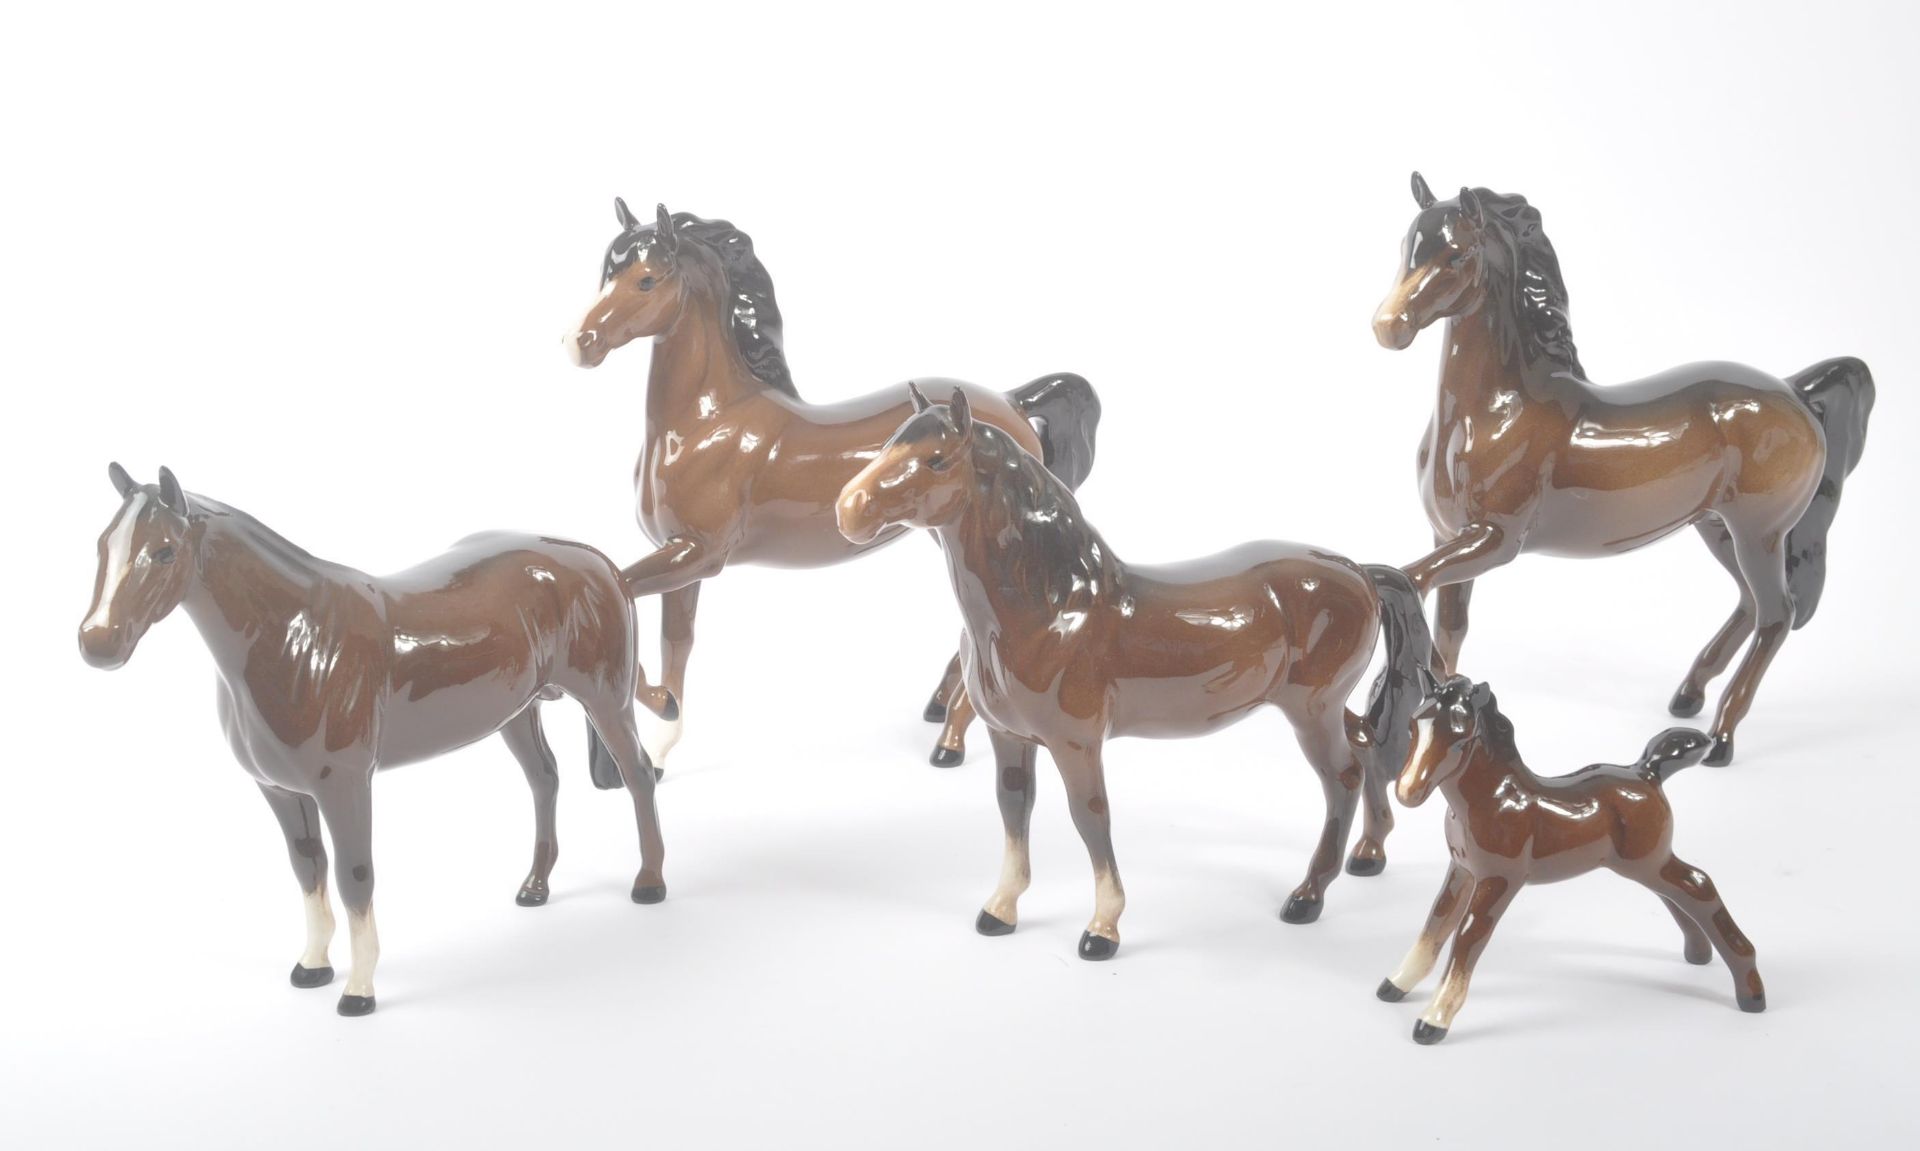 JOHN BESWICK - COLLECTION OF FIVE PORCELAIN HORSE FIGURES